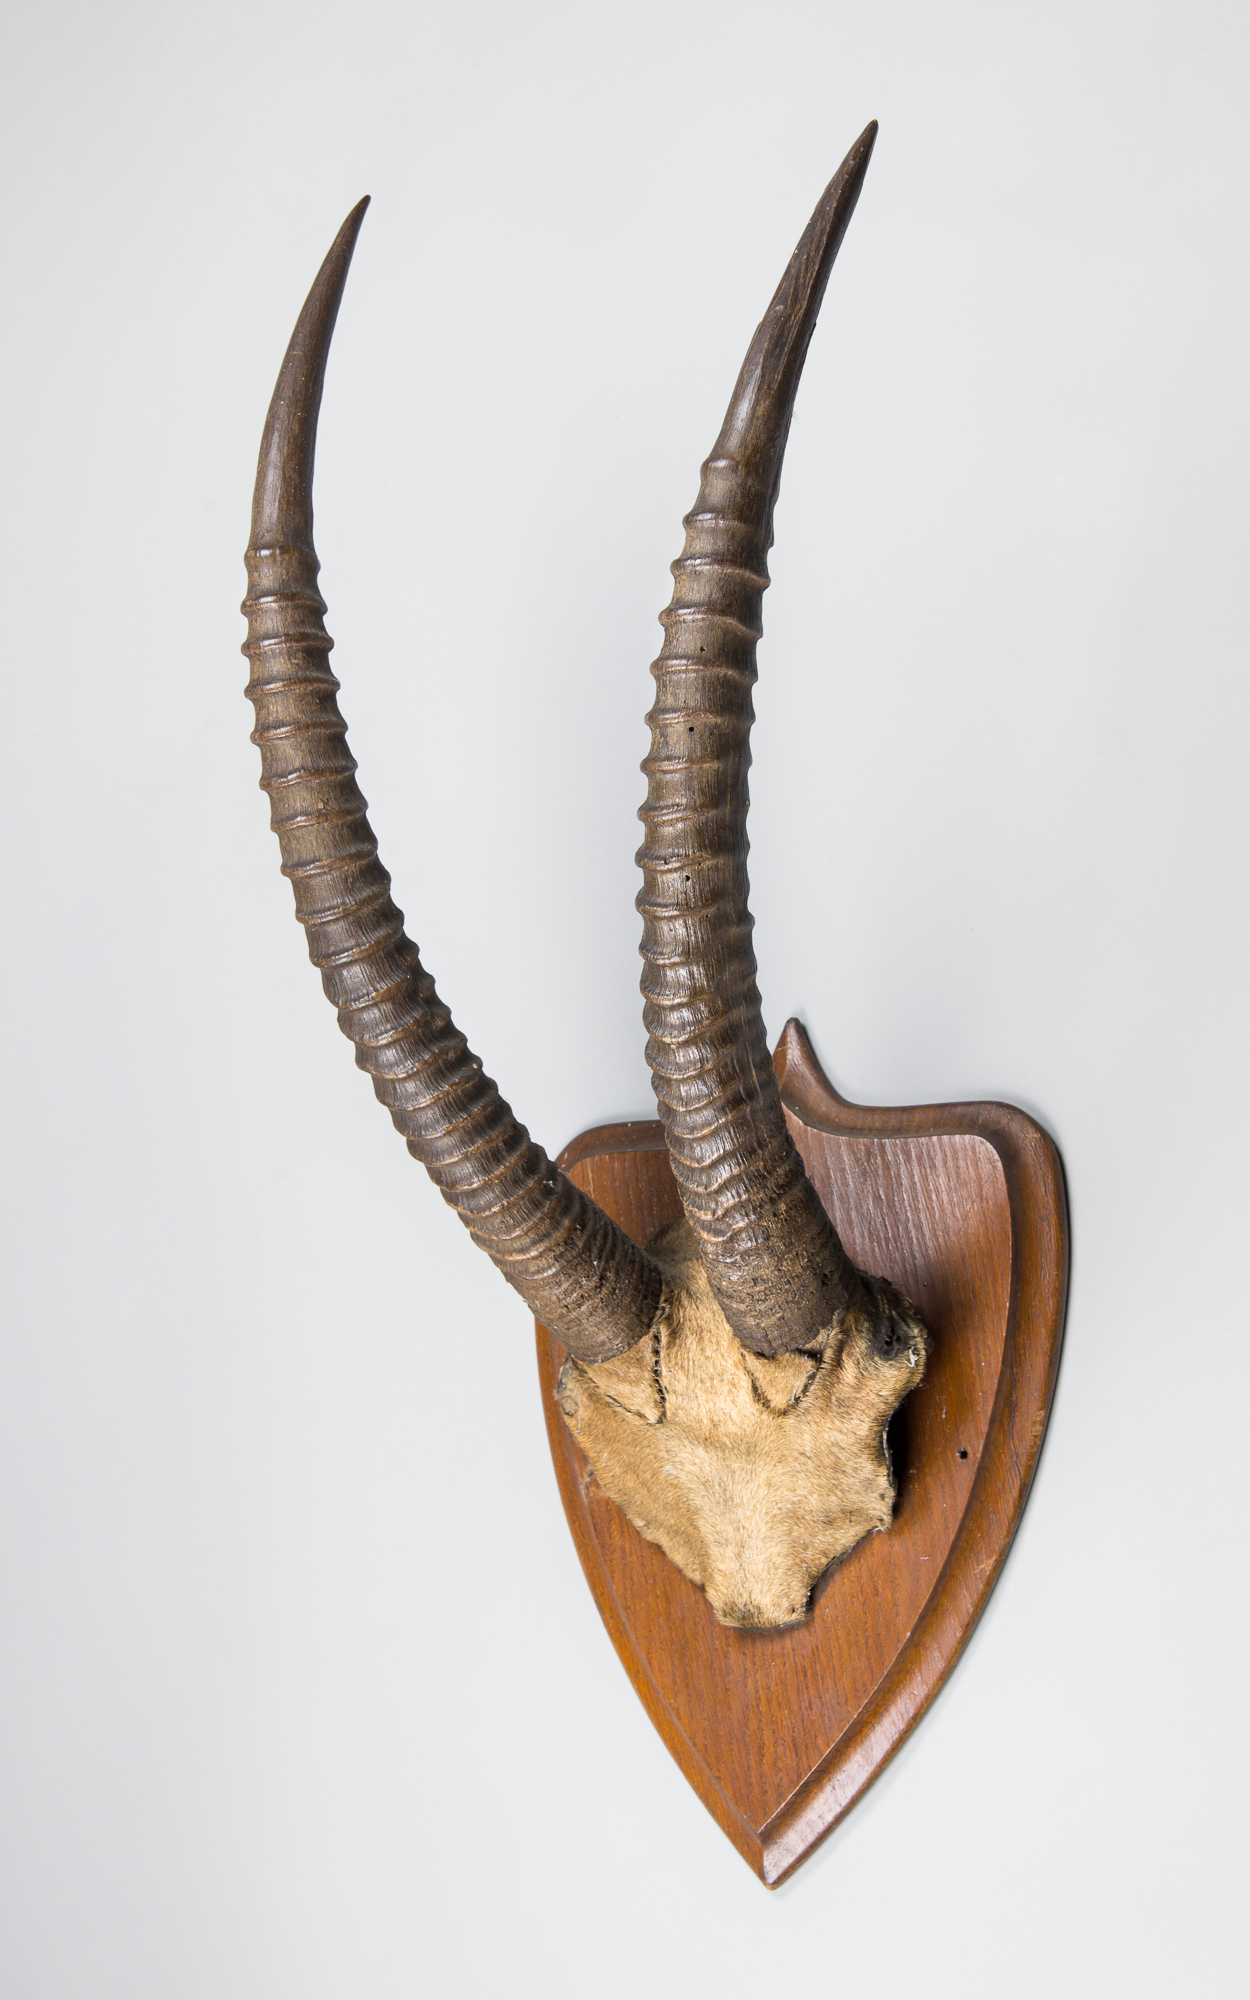 A LATE 19TH/EARLY 20TH CENTURY SET OF SABLE ANTELOPE HORNS MOUNTED UPON AN OAK SHIELD (h 70cm x w